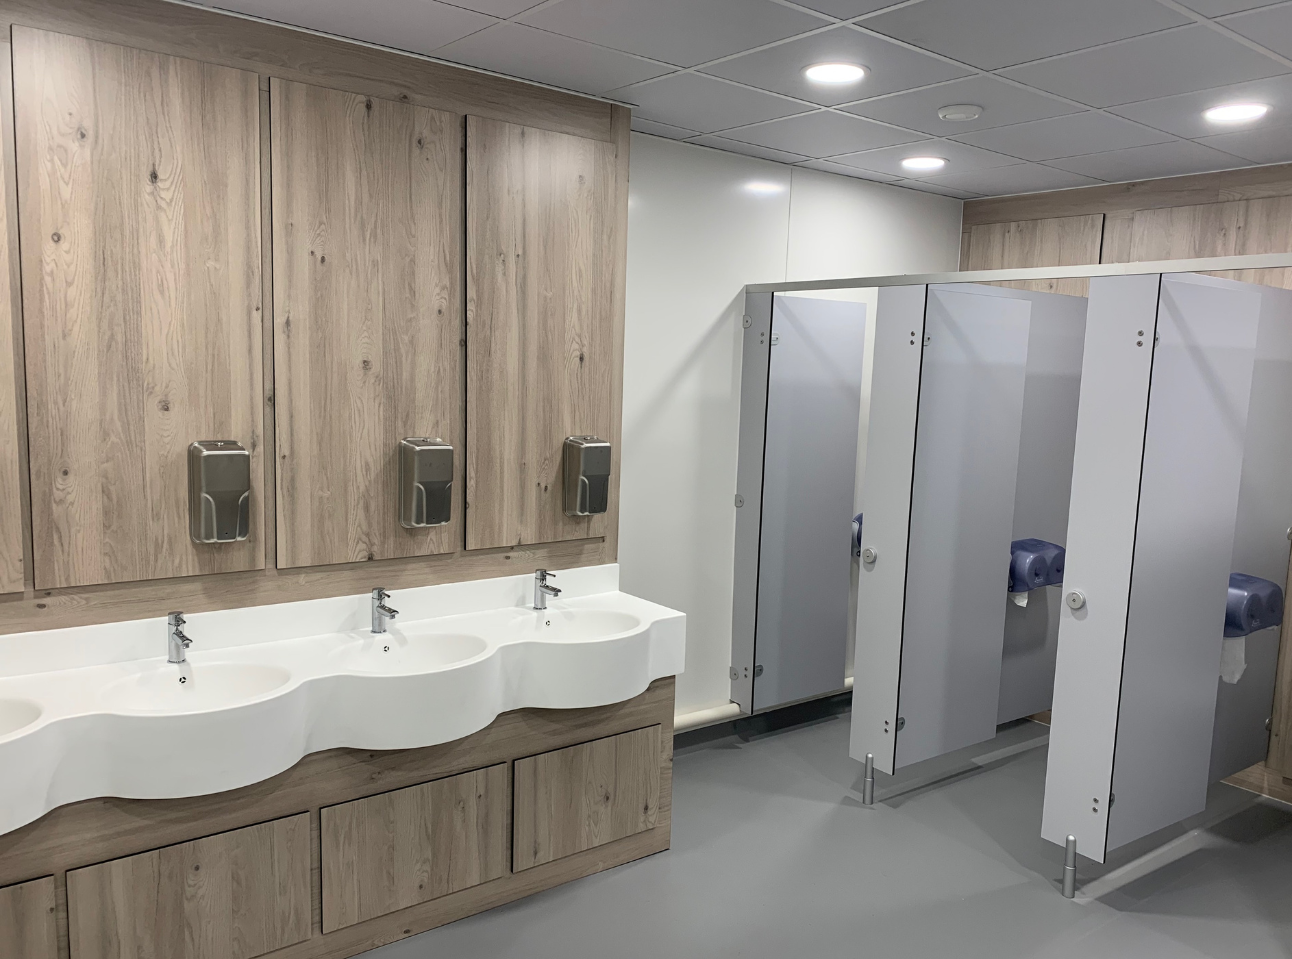 Gooch and Housego Washrooms - Commercial Washrooms